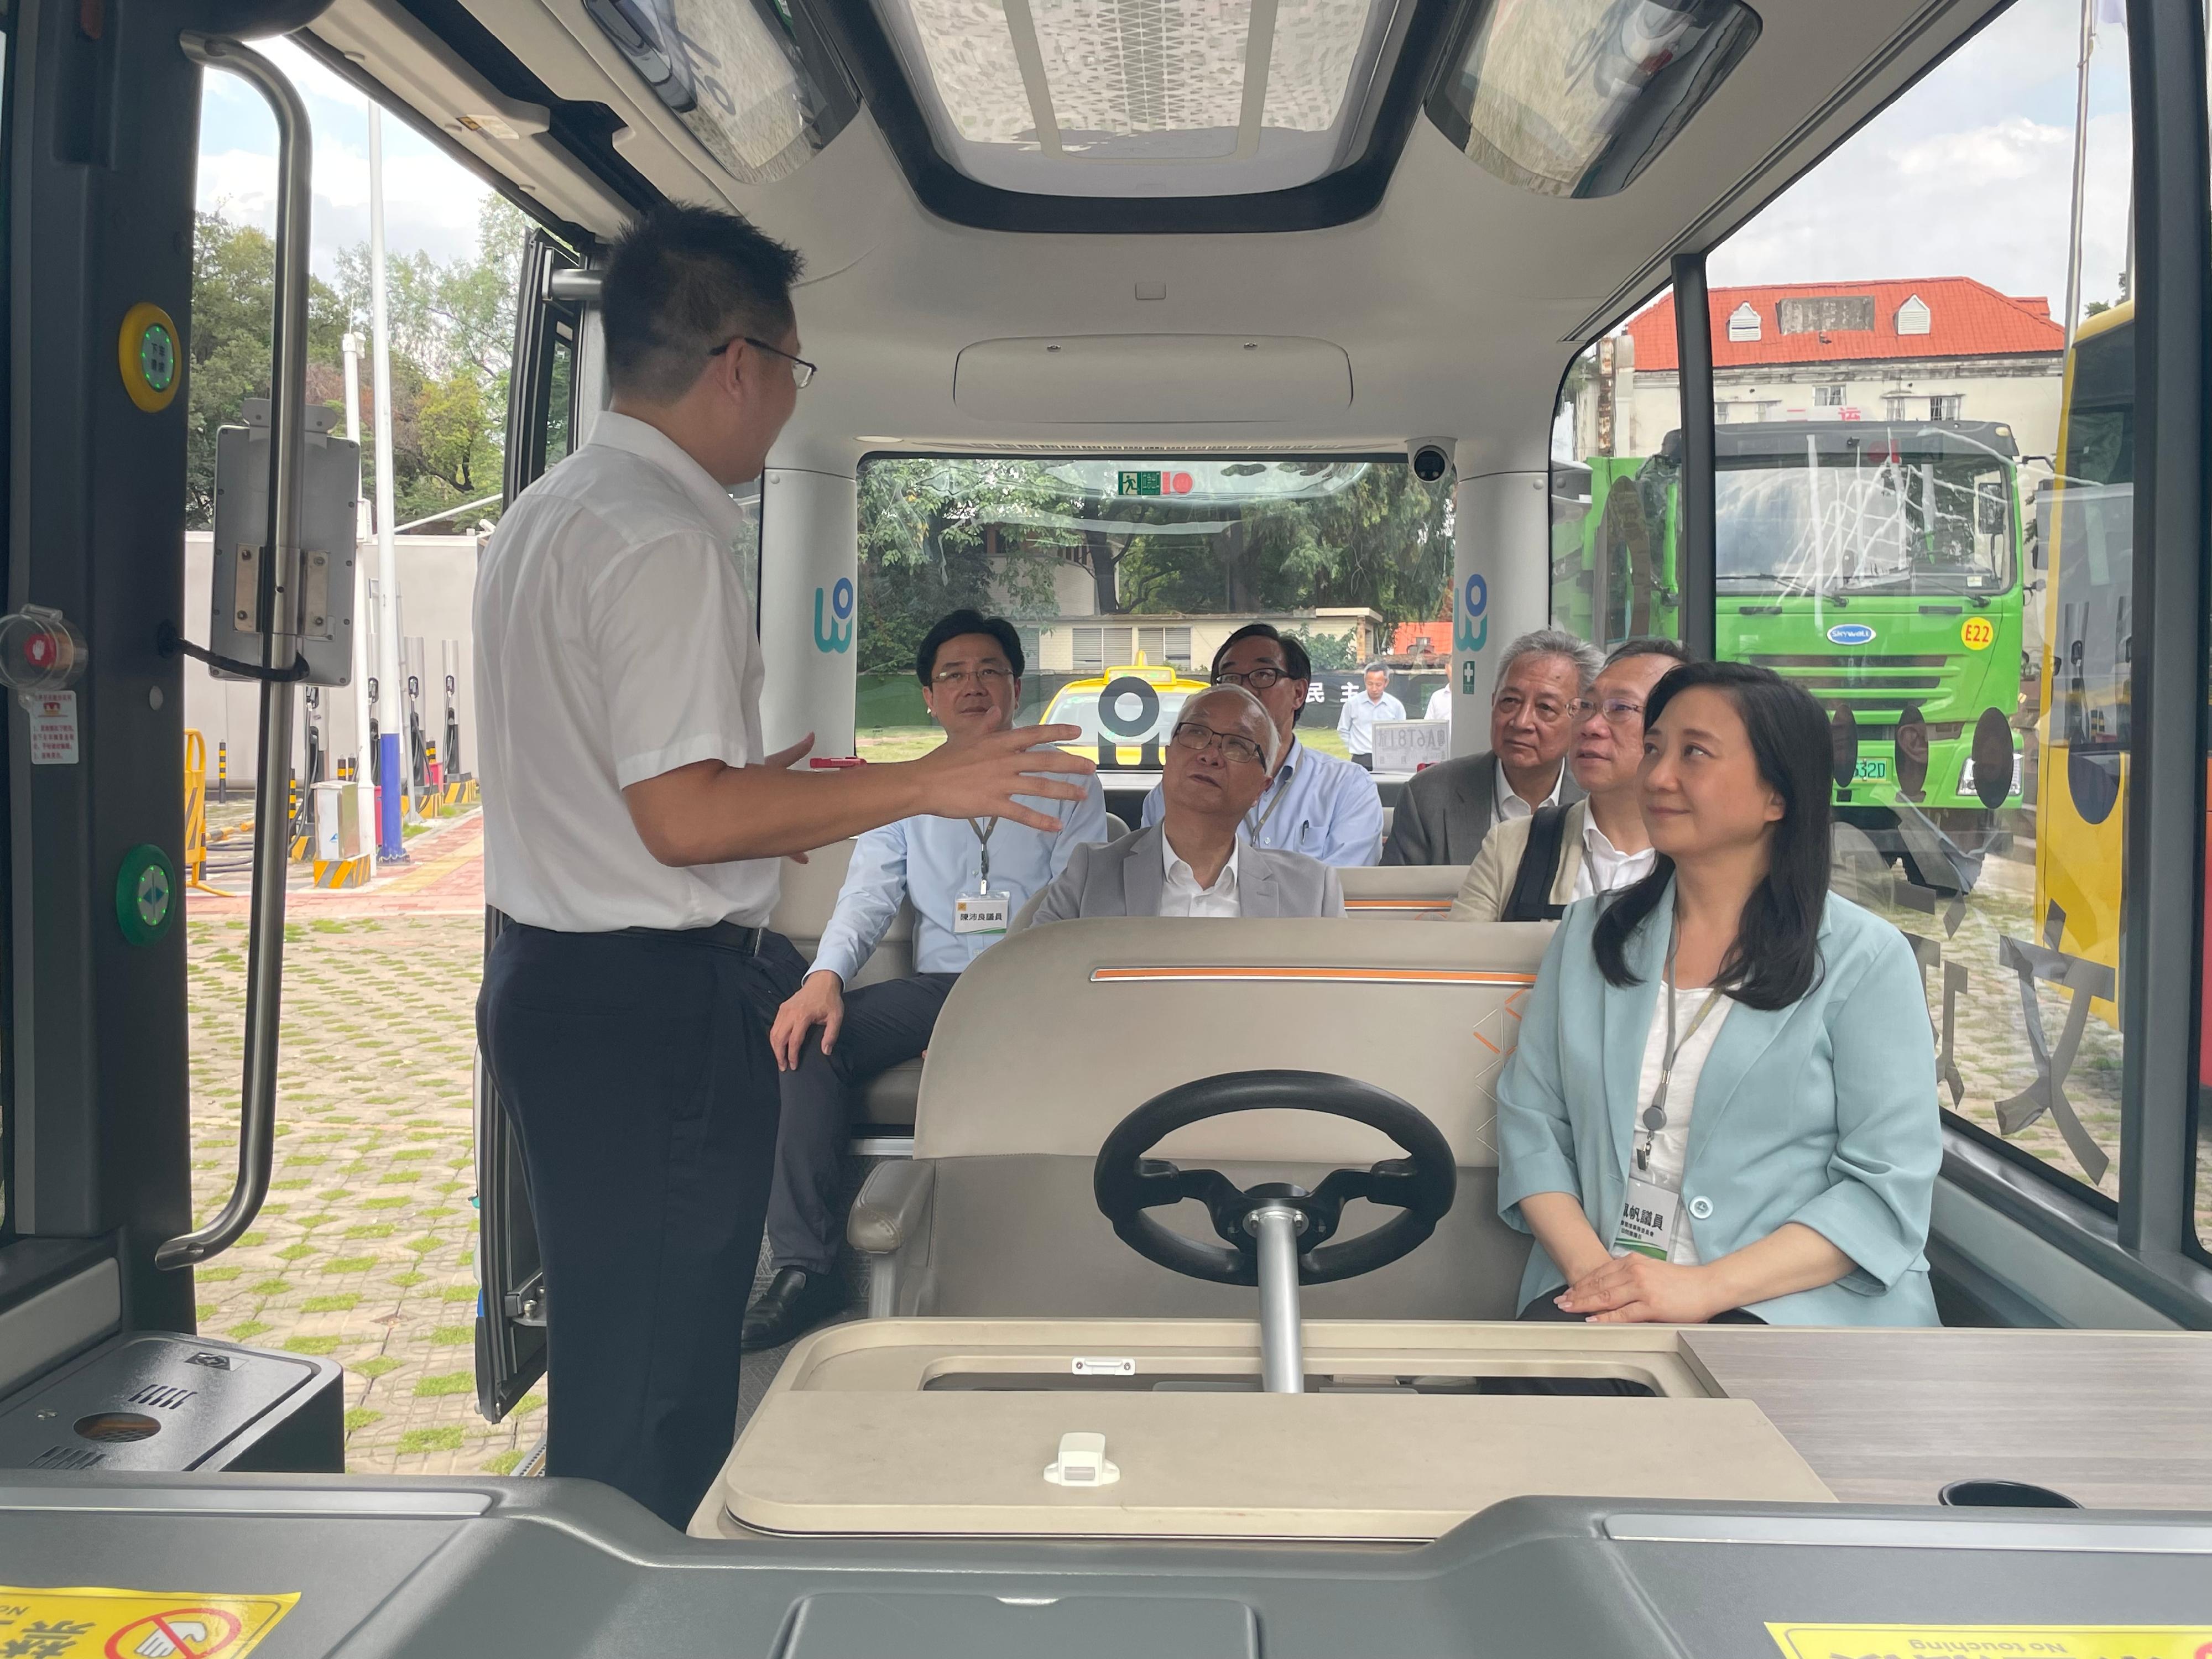 The Secretary for Environment and Ecology, Mr Tse Chin-wan, together with the Legislative Council Panel on Environmental Affairs, visited the Yanling new energy eco-industrial park and Guangzhou public transport command center of the Guangzhou Public Transport Group this afternoon (August 7). Photo shows Mr Tse (second row, second right), and the delegation of the Legislative Council Panel on Environmental Affairs, receiving a briefing from a representative on their intelligent automobiles.